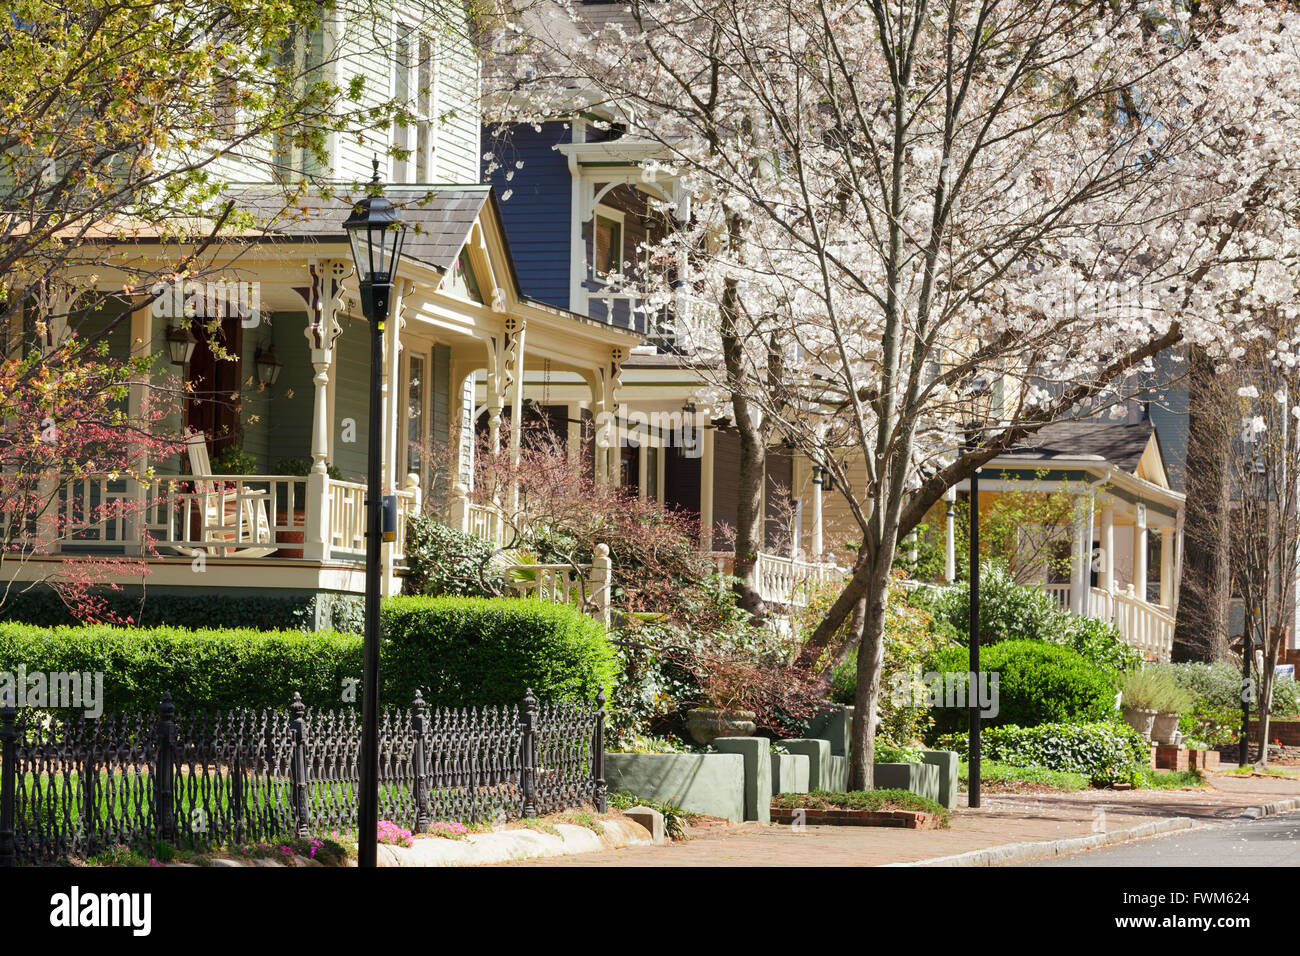 lovely victorian homes in historic fourth ward neighborhood charlotte FWM624